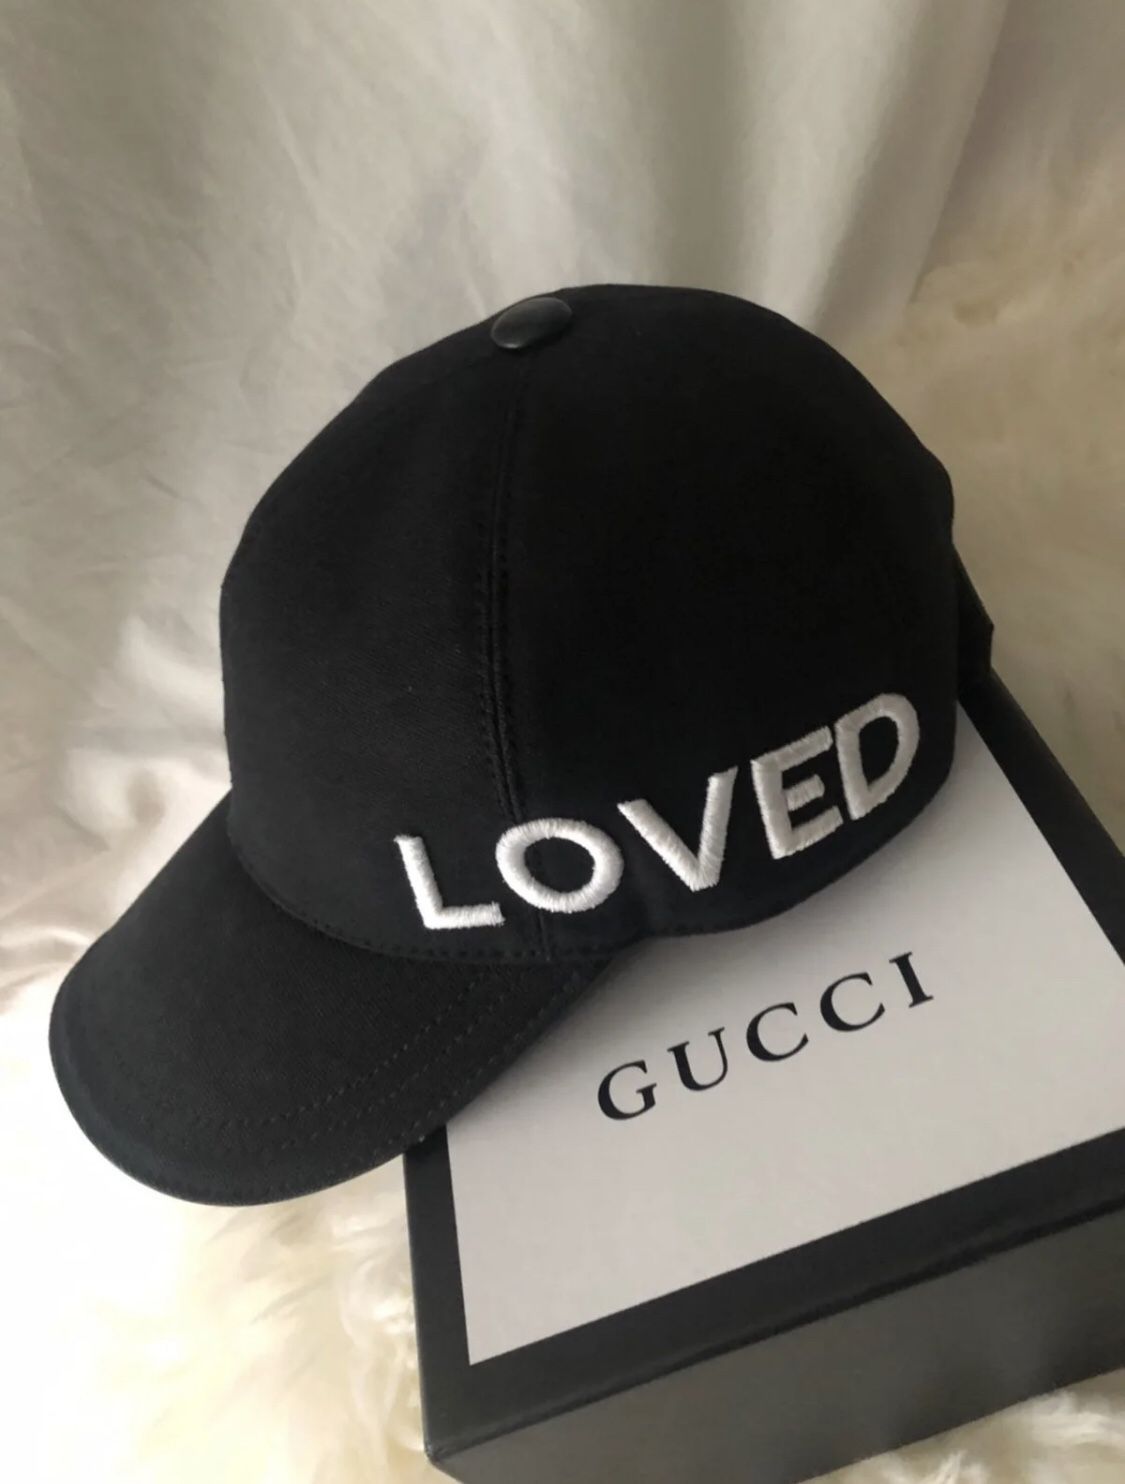 GUCCI “LOVED” (NEW!!) Adjustable